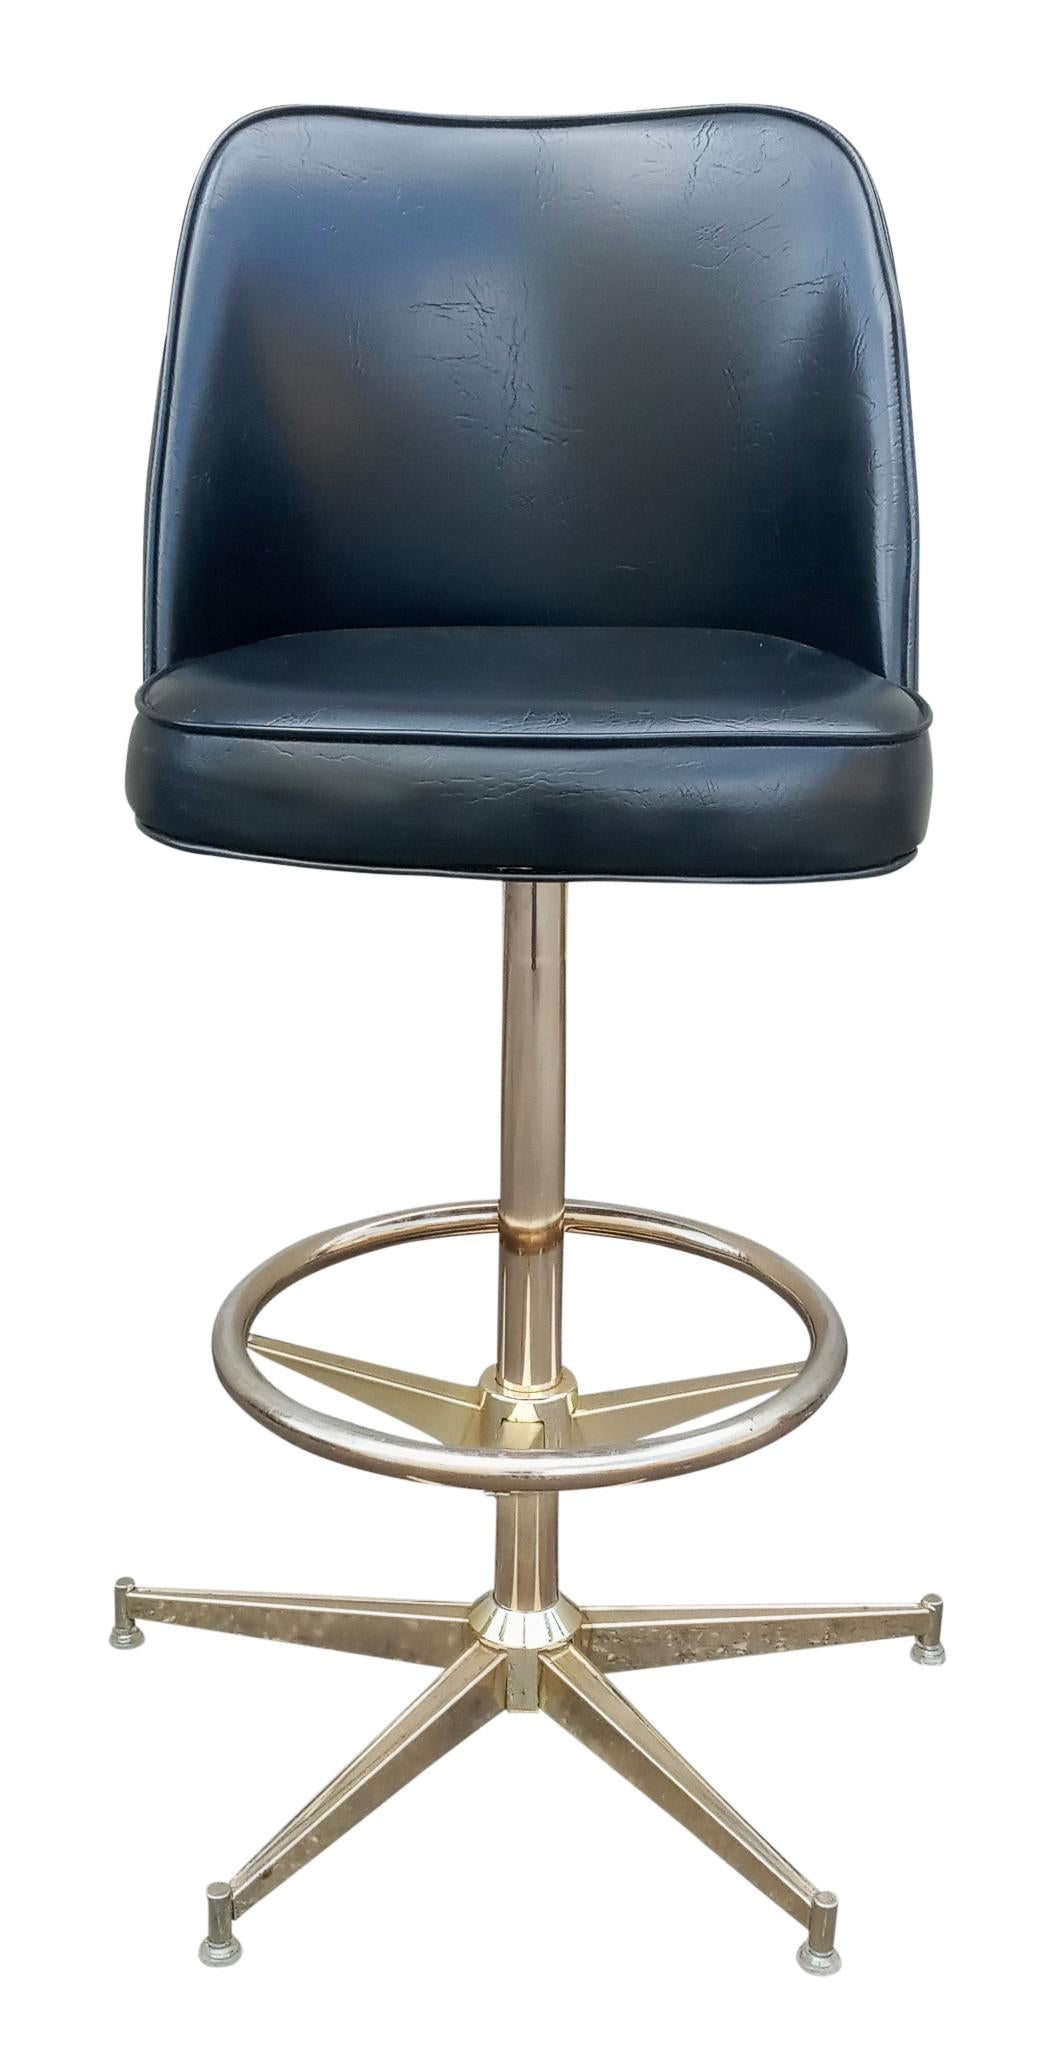 For your consideration, a big set of 5 stools by Shelby Williams. These super stylish and highly comfortable bar height stools have swivel seats in faux vinyl and are mounted to 5-star (very stable) bases in bright metal with a brass-tone finish.